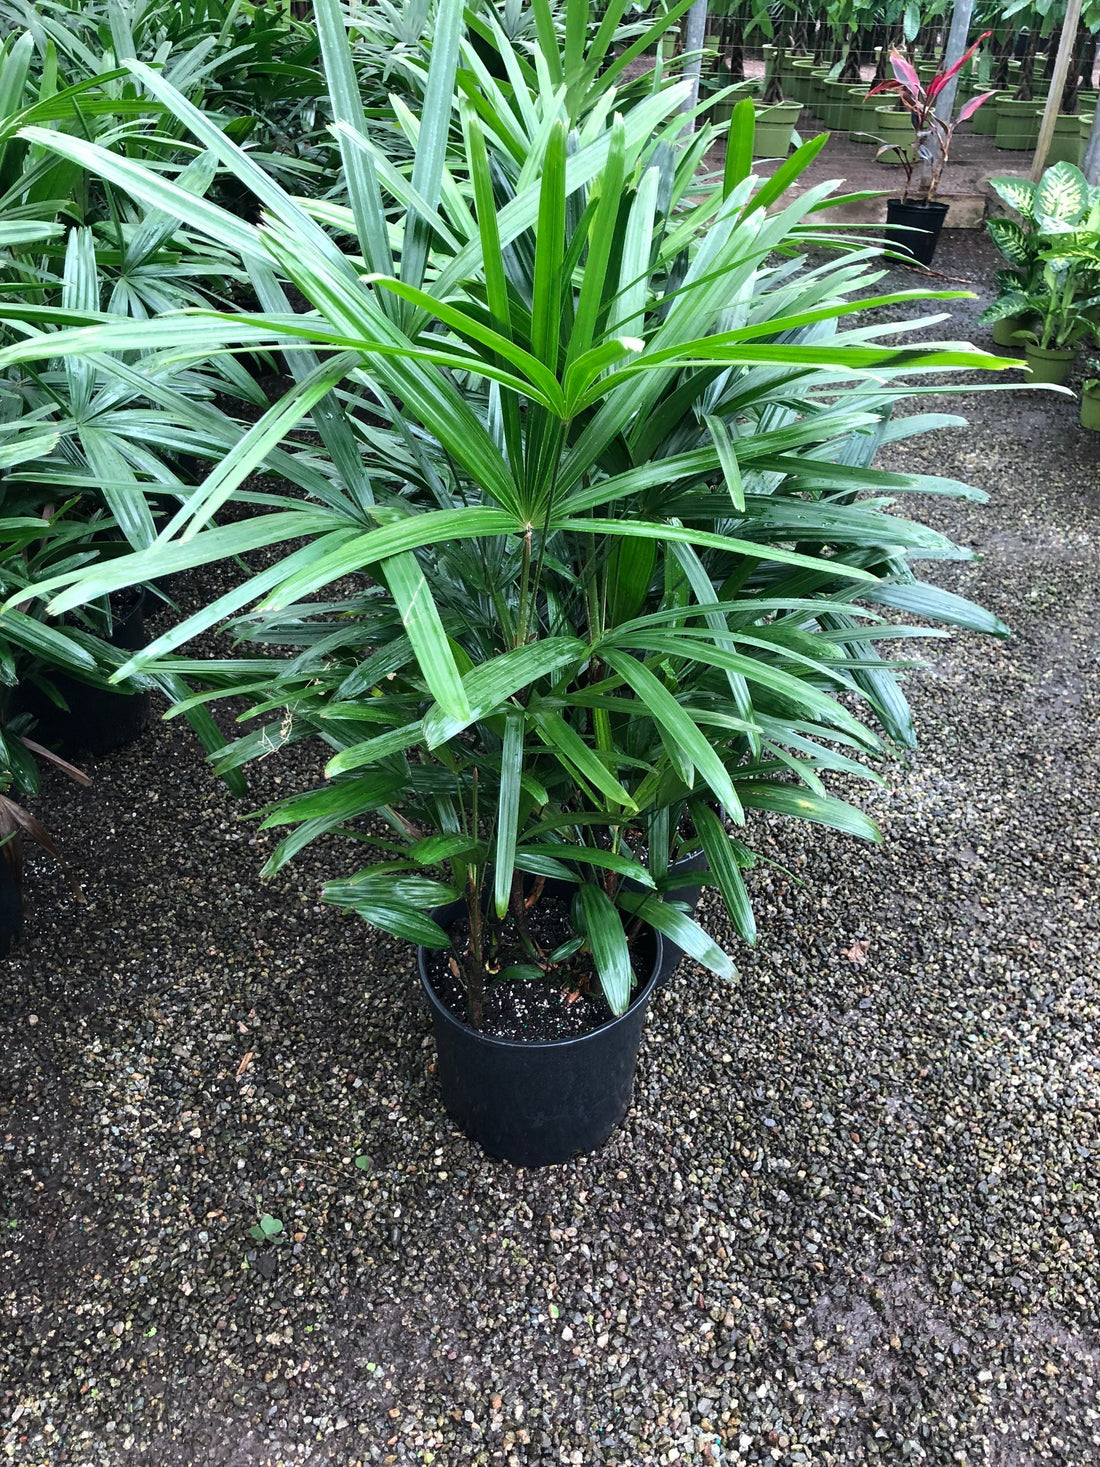 3-4 feet Tall -Rhapis Palm  -indoor or outdoor -low maintenance easy care-similar to photo not exact plant